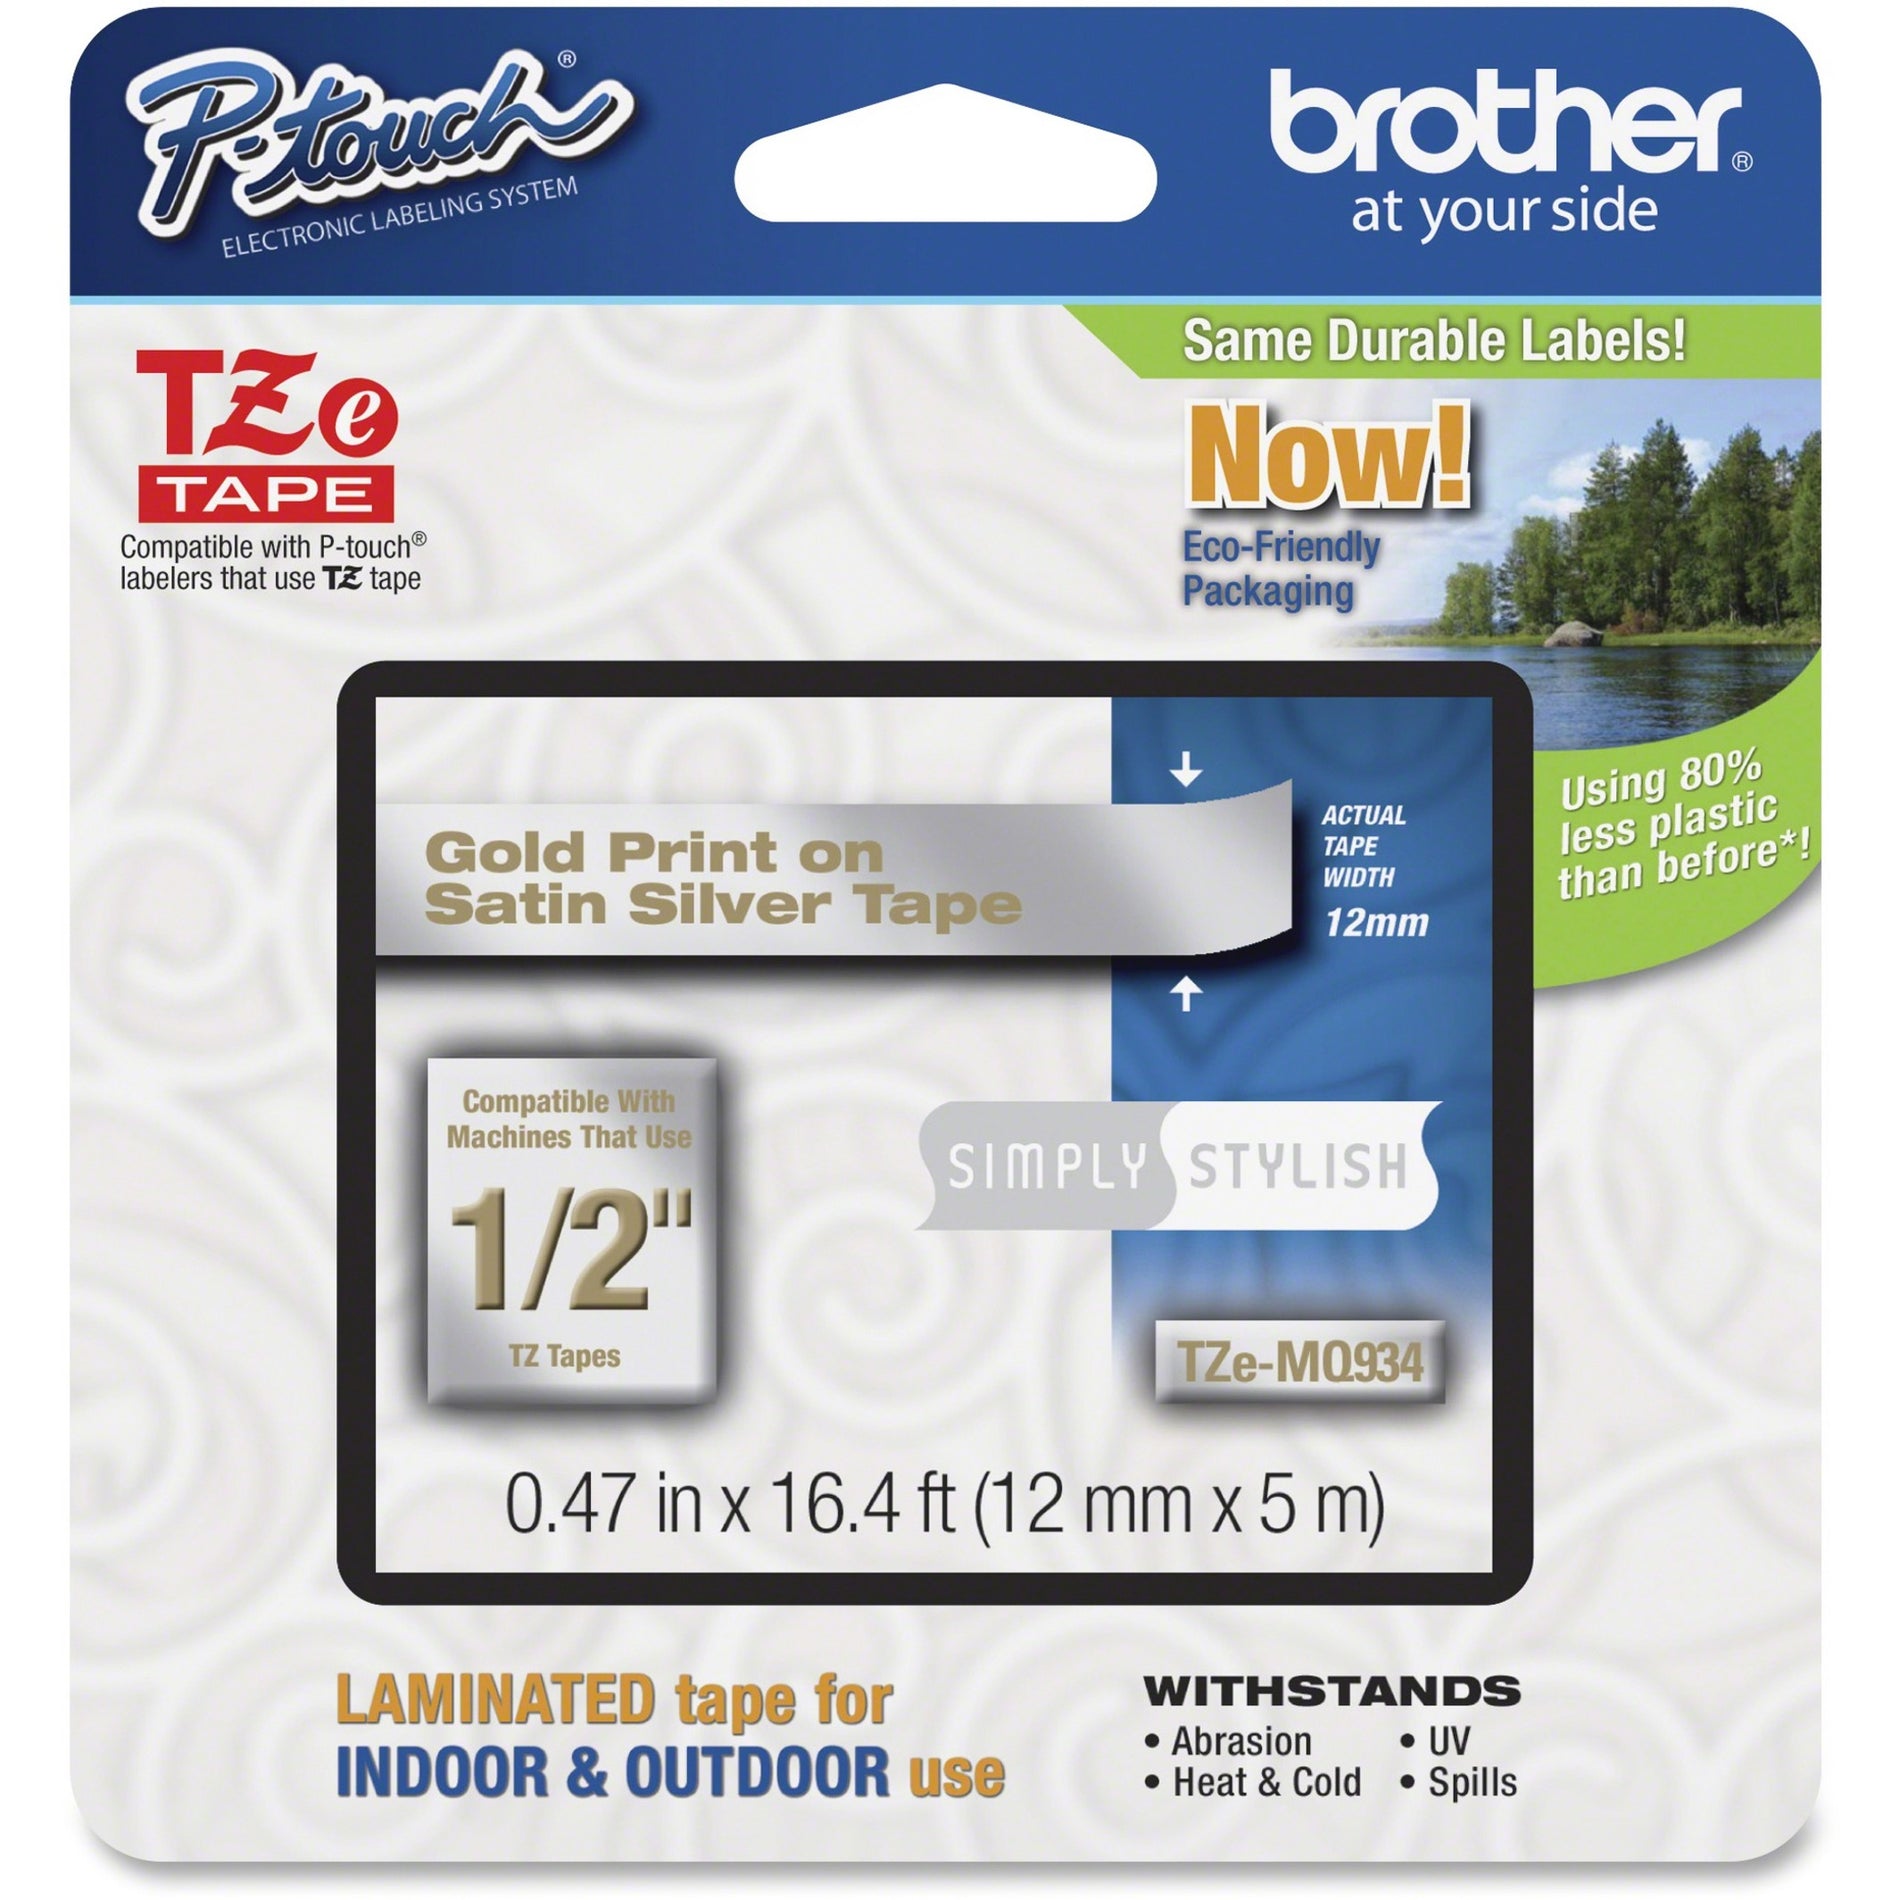 Brother TZEMQ934 P-Touch TZe Laminated Tape, Gold/ Satin Silver, 12mm